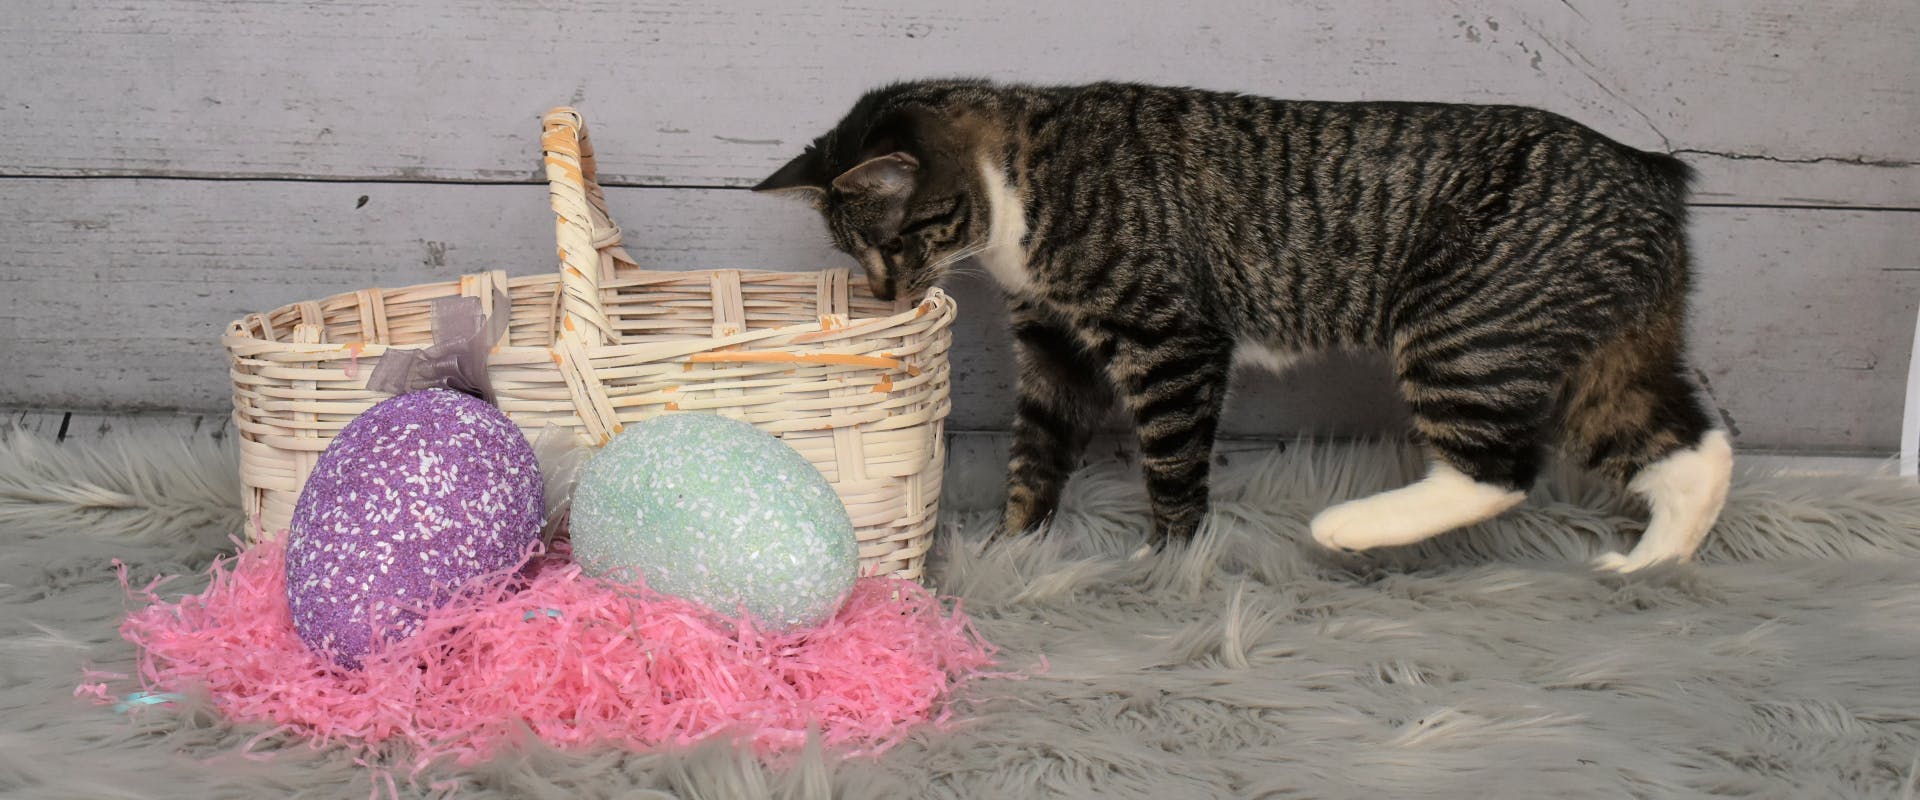 tabby manx cat looking into a whicker basket